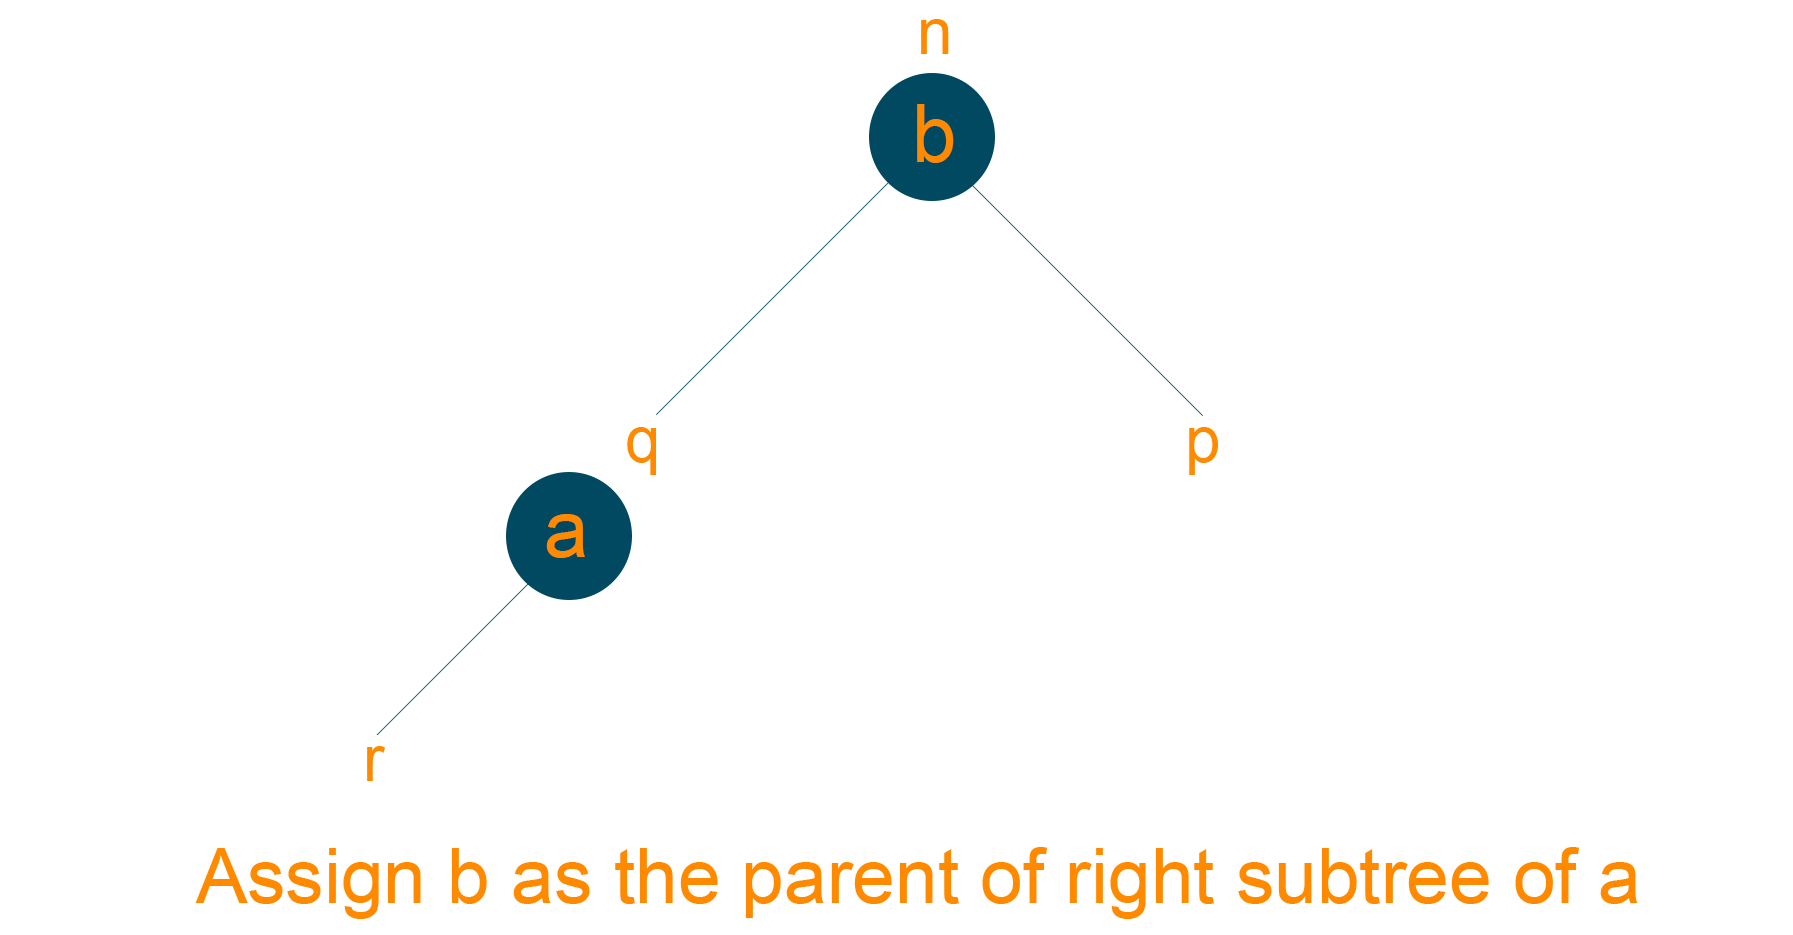 Assigning B as the parent of right subtree of A